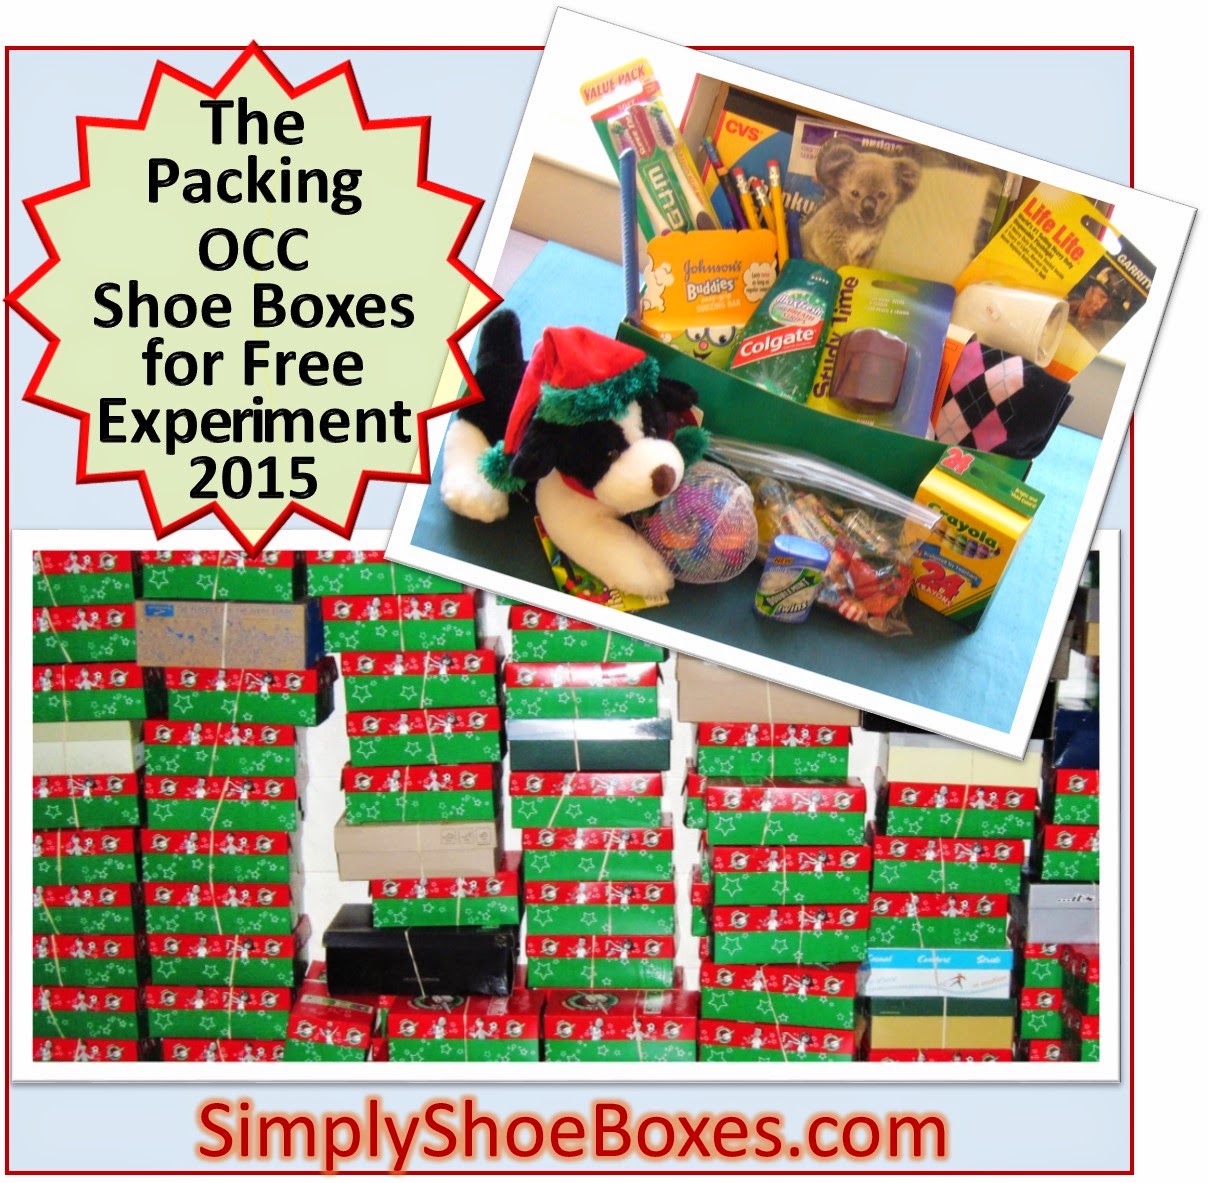 Packing OCC Shoe Boxes for Free Experiment 2015